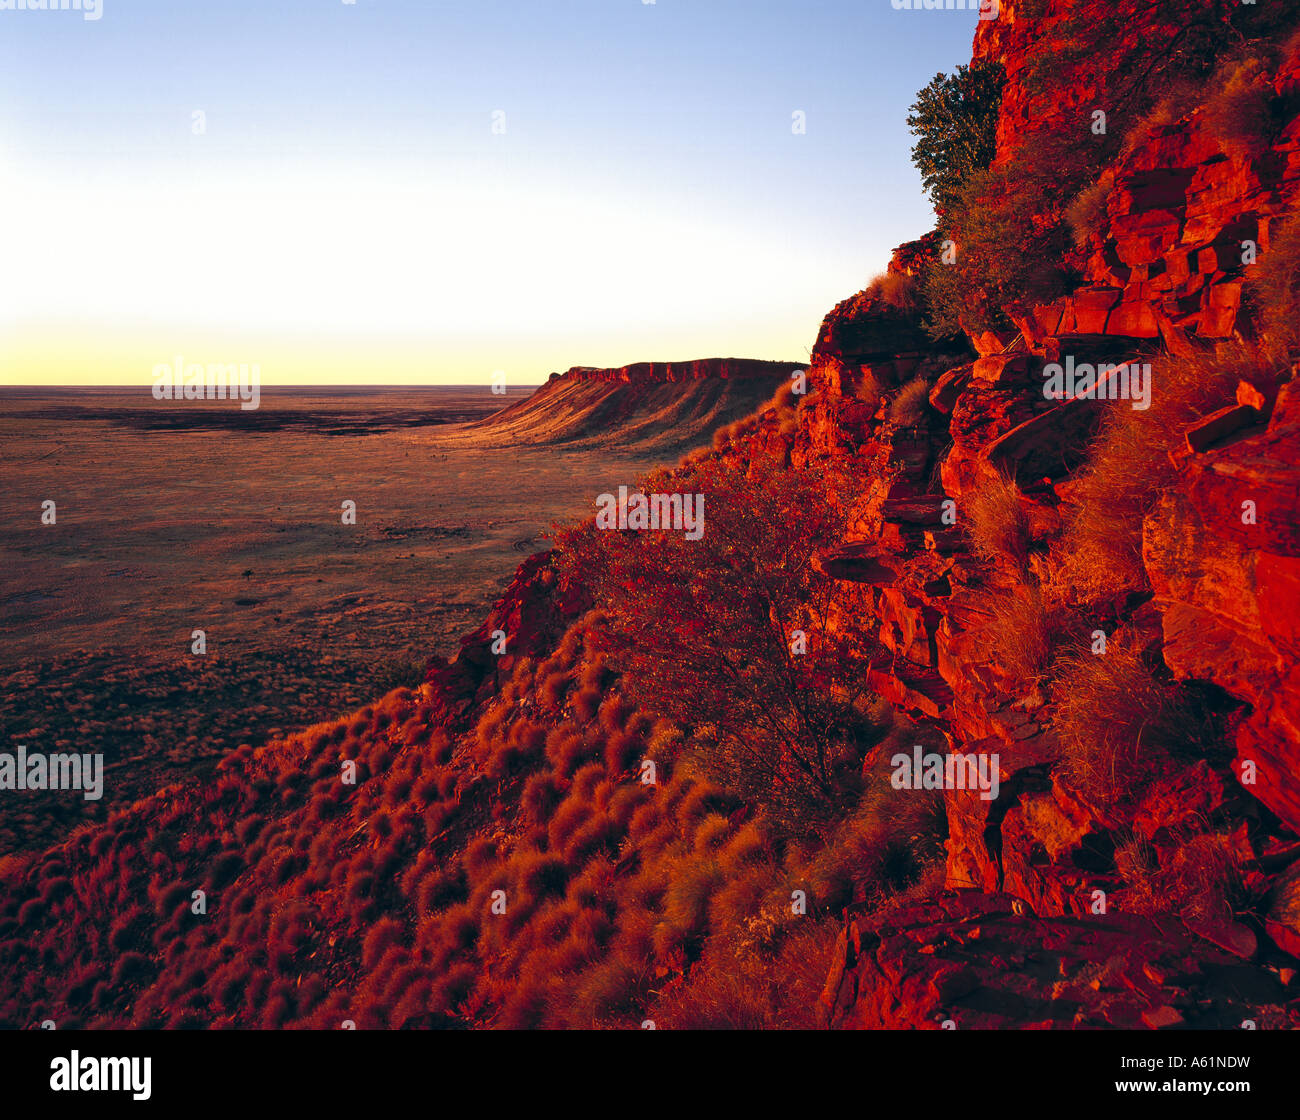 Red sunset light on the western escarpment of the Breadon Hills on the Canning Stock Route Great Sandy Desert Western Australia Stock Photo